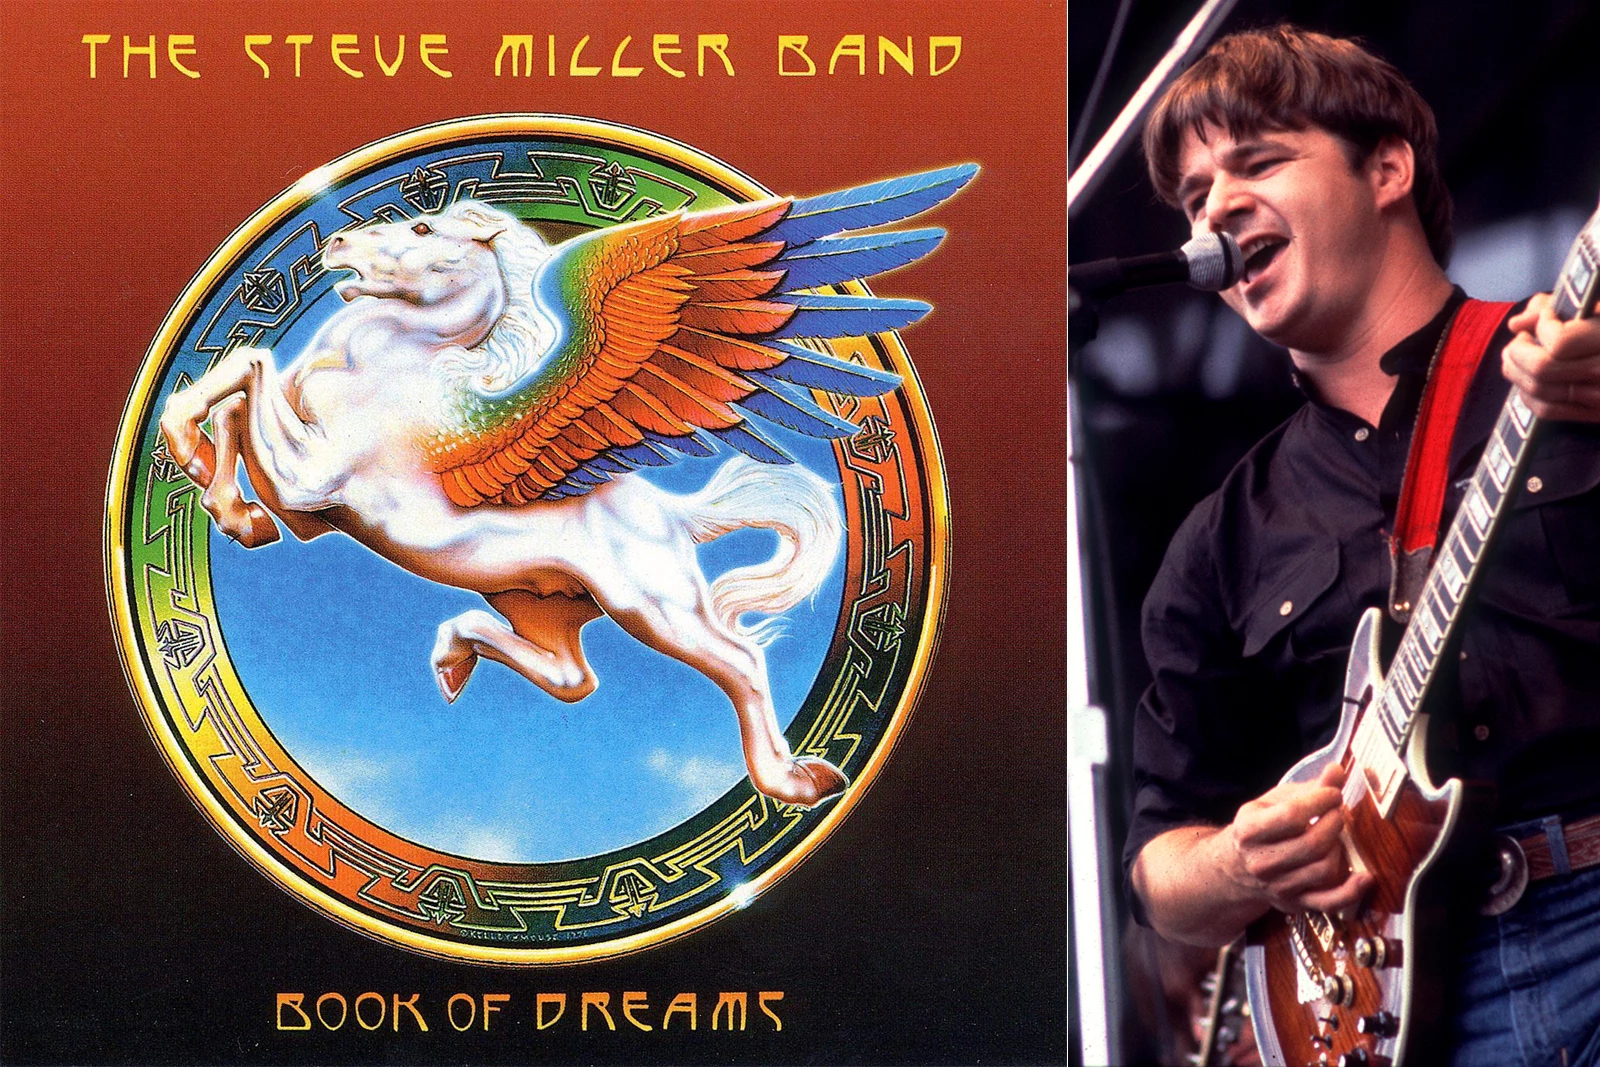 When Steve Miller Band Reached a New Peak With 'Book of Dreams'